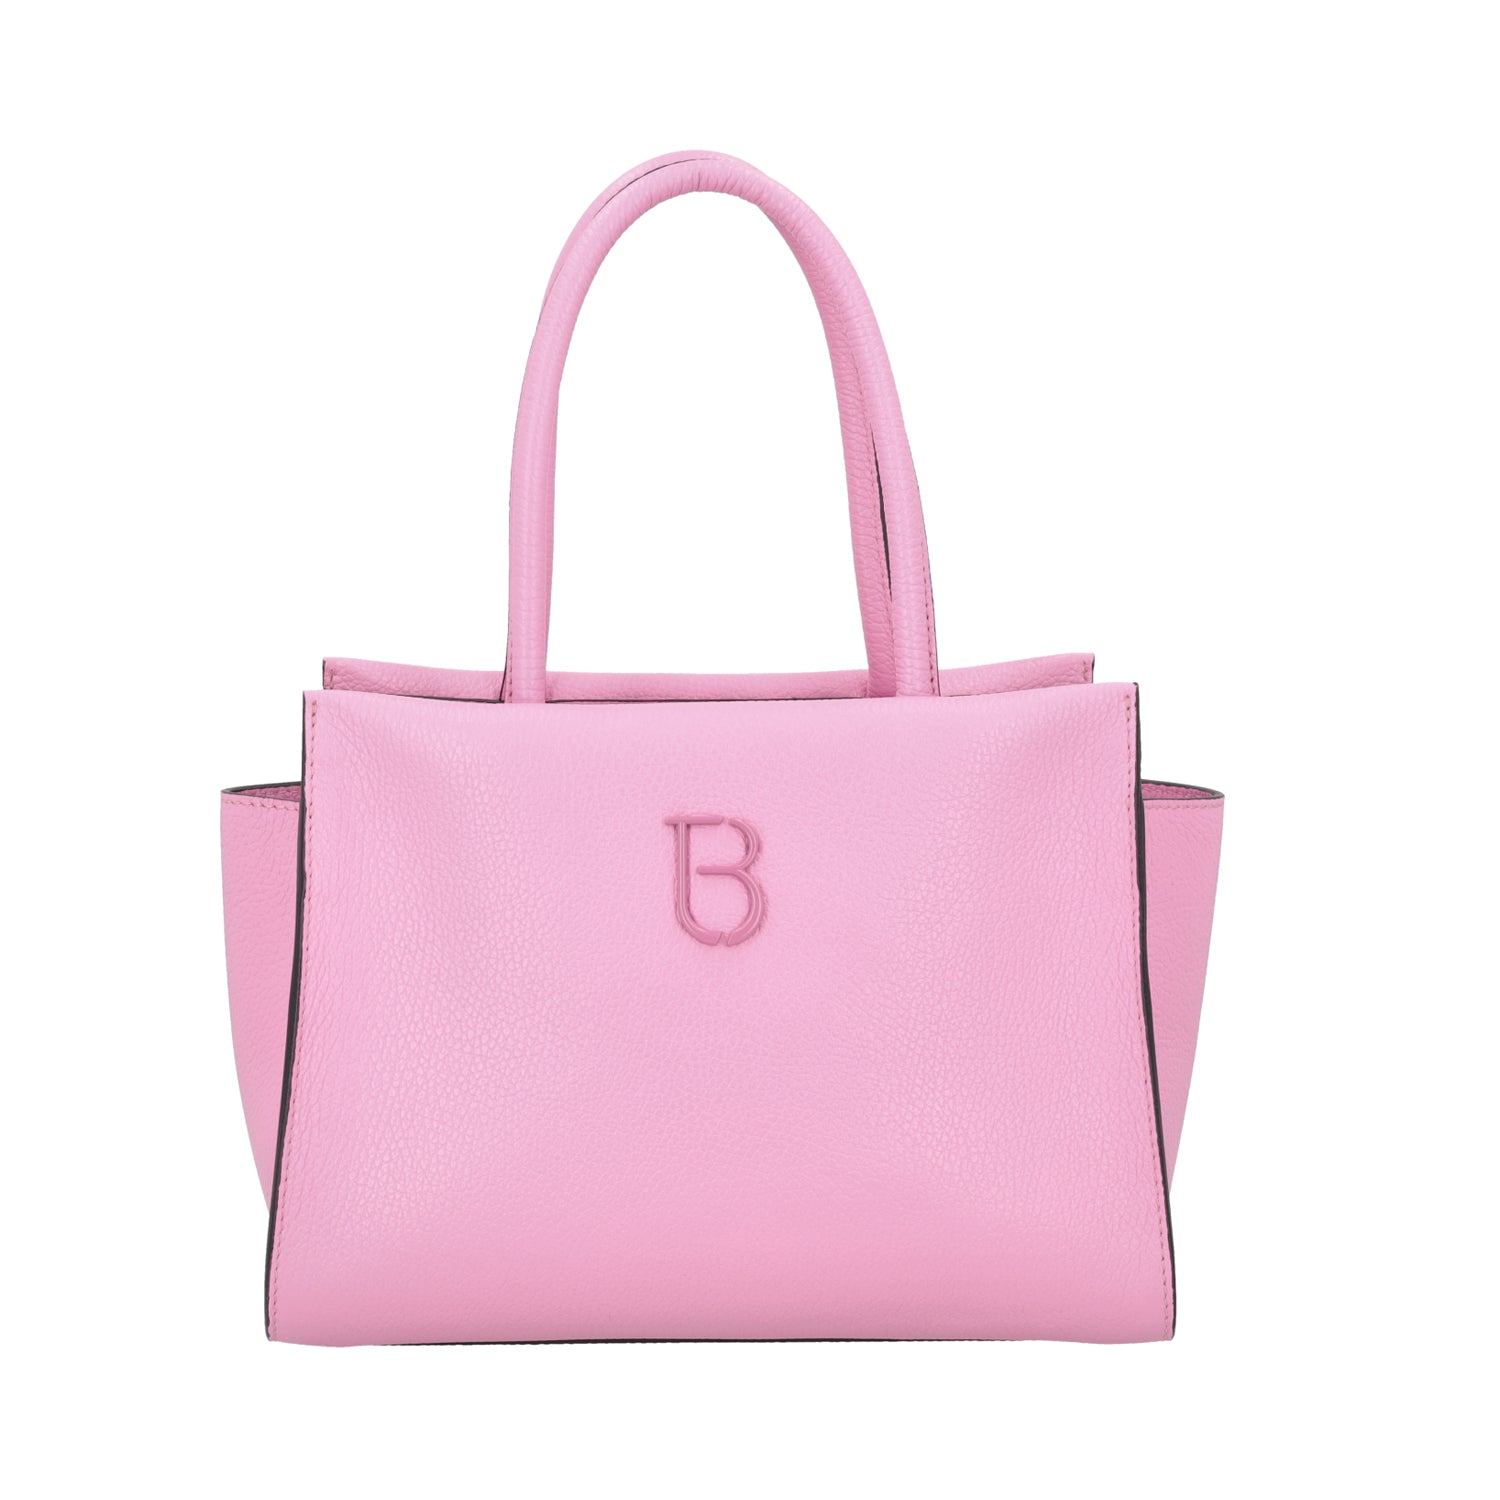 PINK NARCISO HAND BAG IN LEATHER